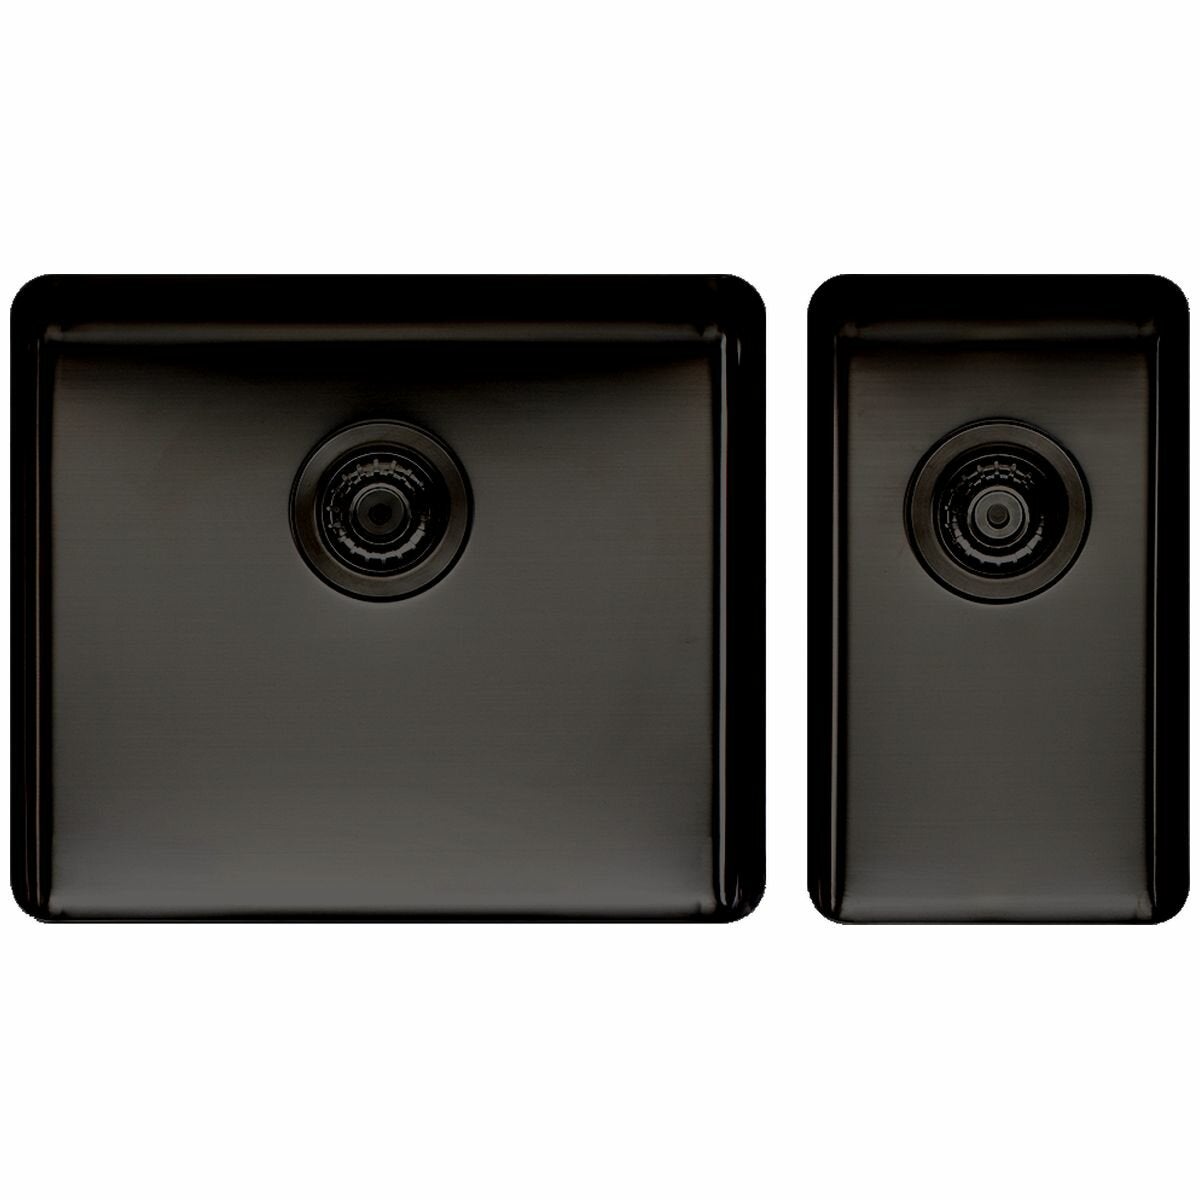 Image of Titan Large and Small Bowl Sink Black Steel TSBS5228